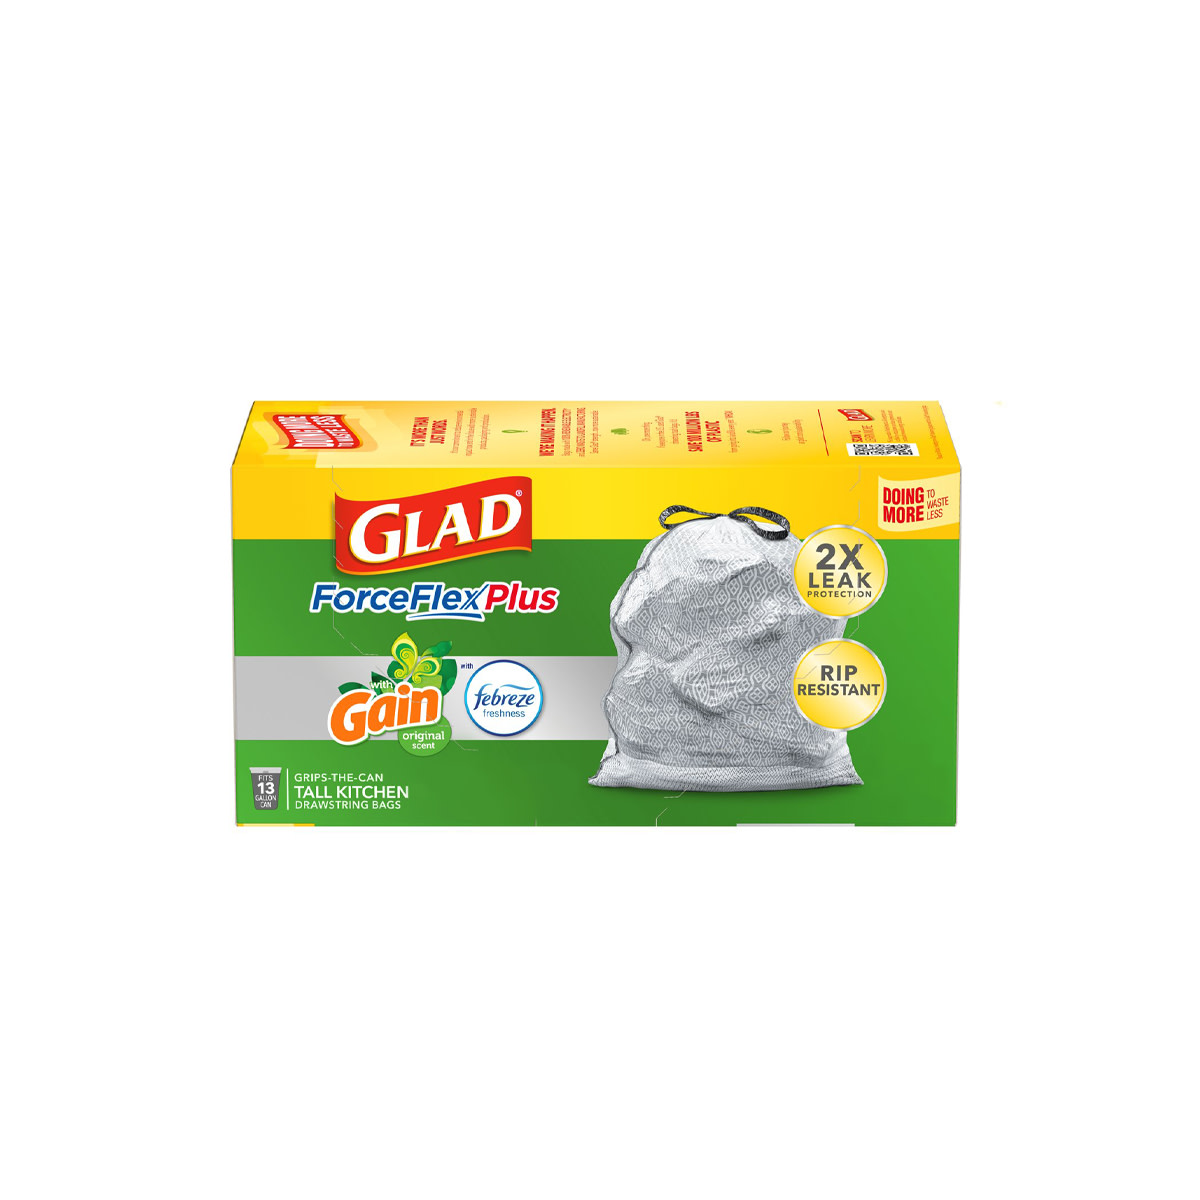 Pack of Glad® ForceFlexPlus® Trash Bags with the scent of Gain Original